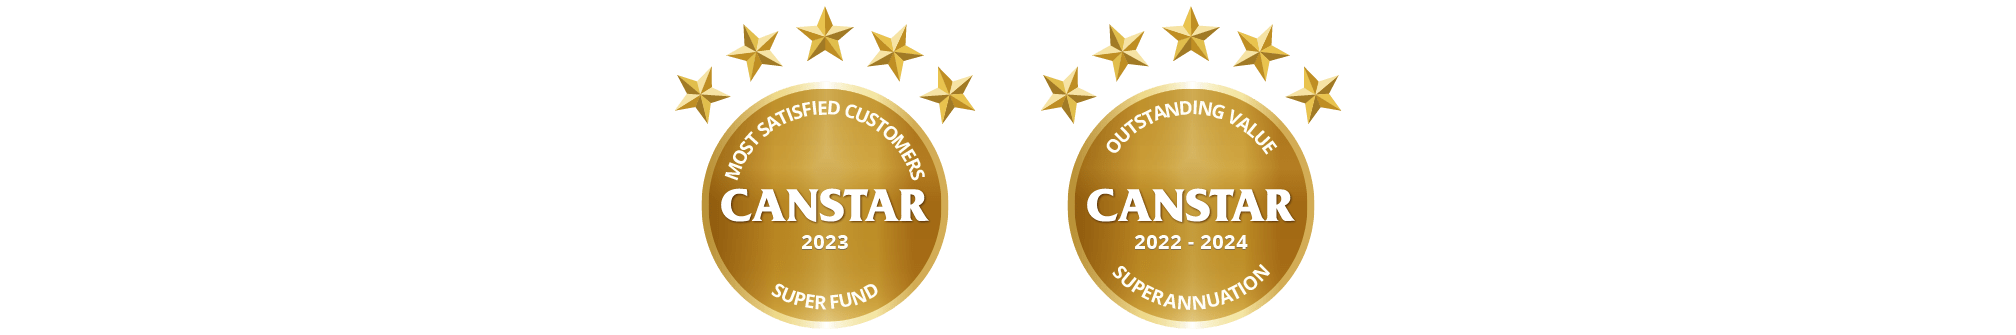 Canstar’s 2023 Most Satisfied Customers: Super Fund Award, Outstanding Value Award – Superannuation 2022-2024